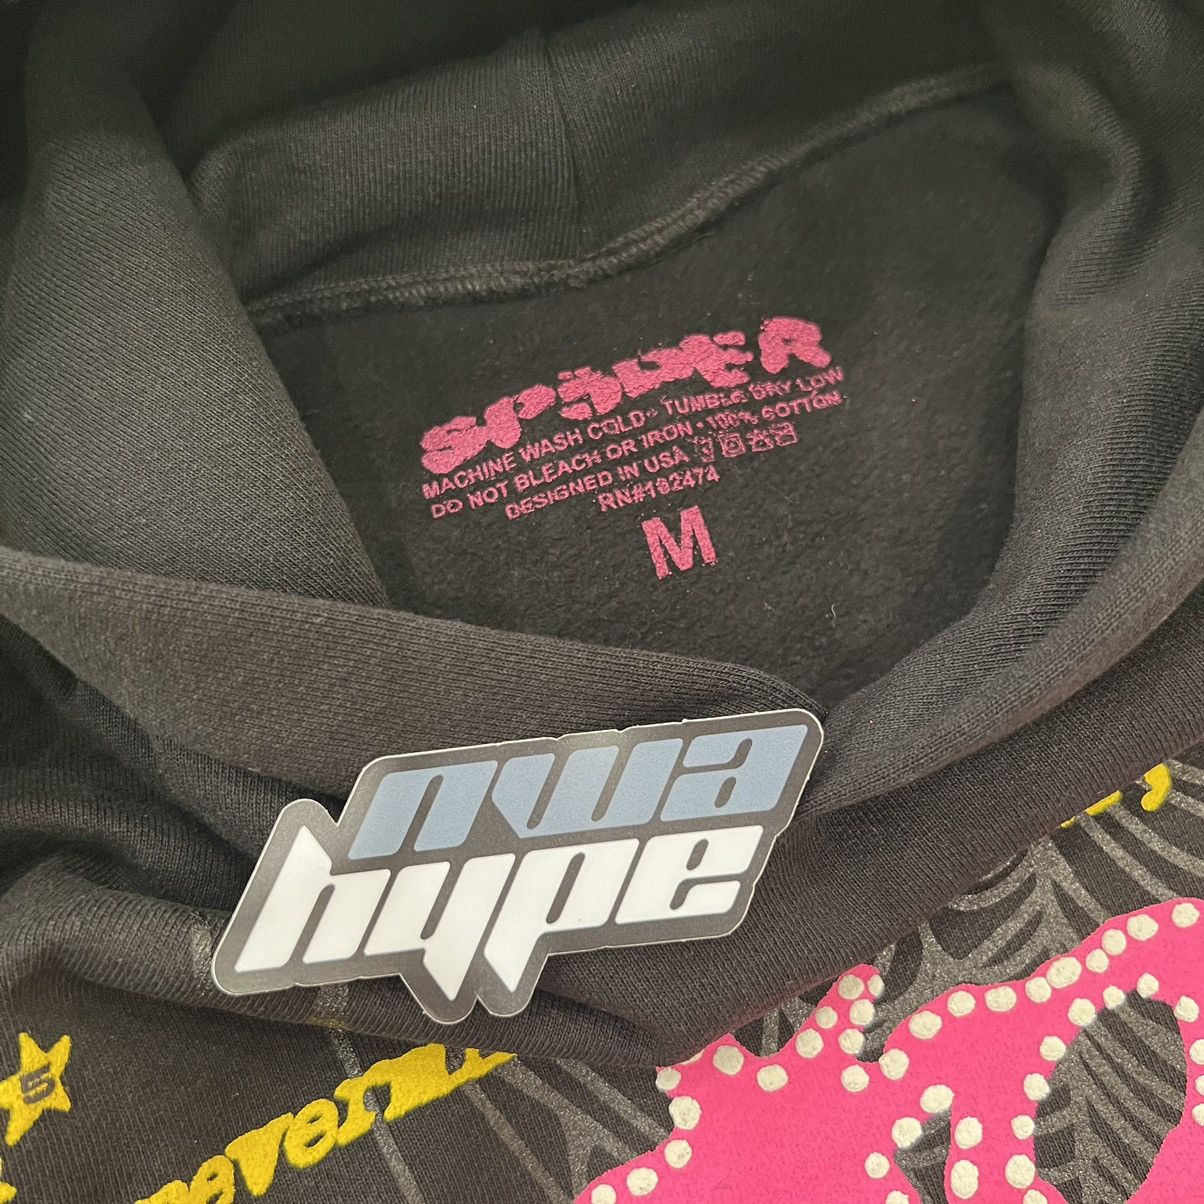 Young Thug Spider worldwide P*nk Hoodie Black M Size US M / EU 48-50 / 2 - 3 Preview